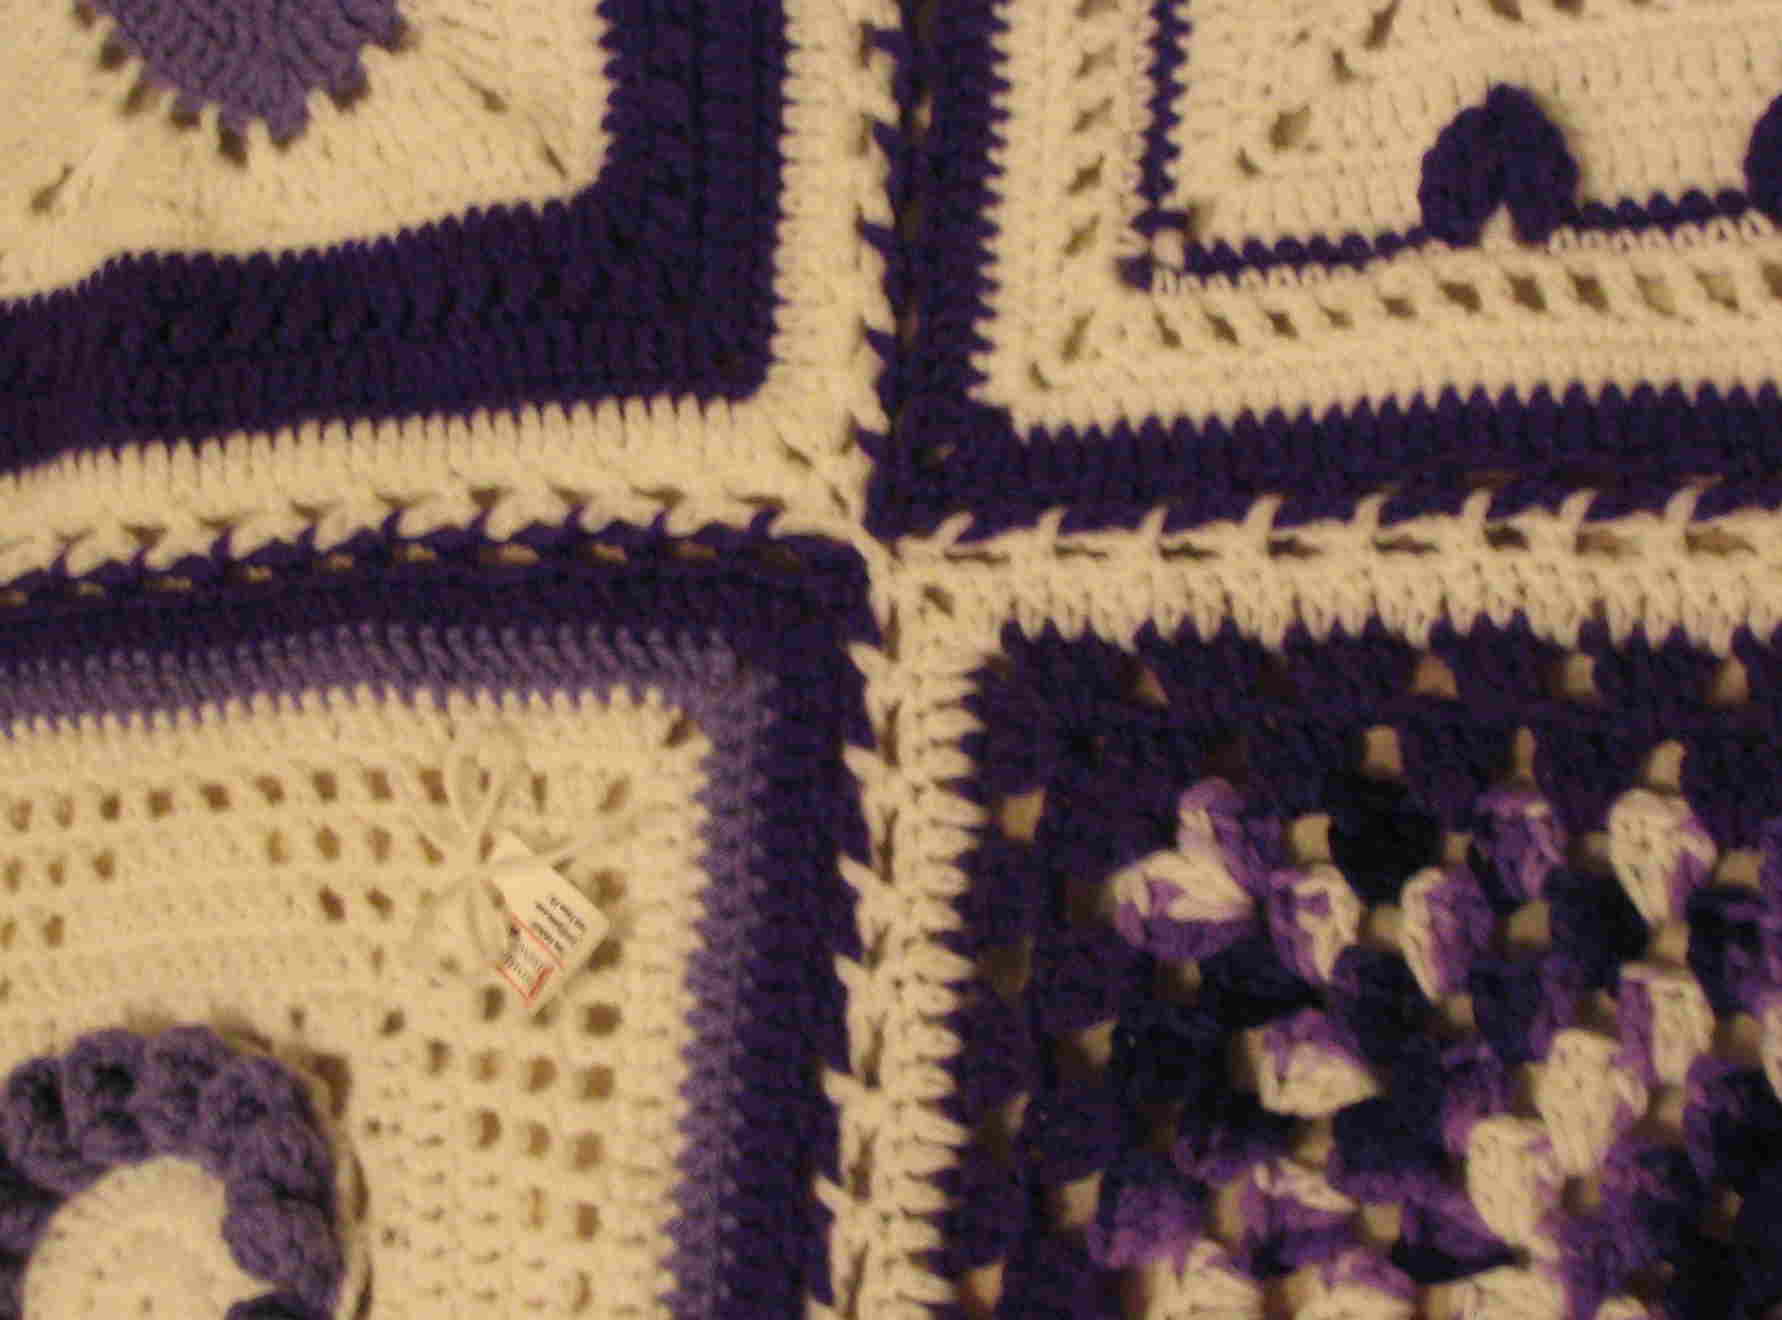 Detail of square borders on Tracey C afghan